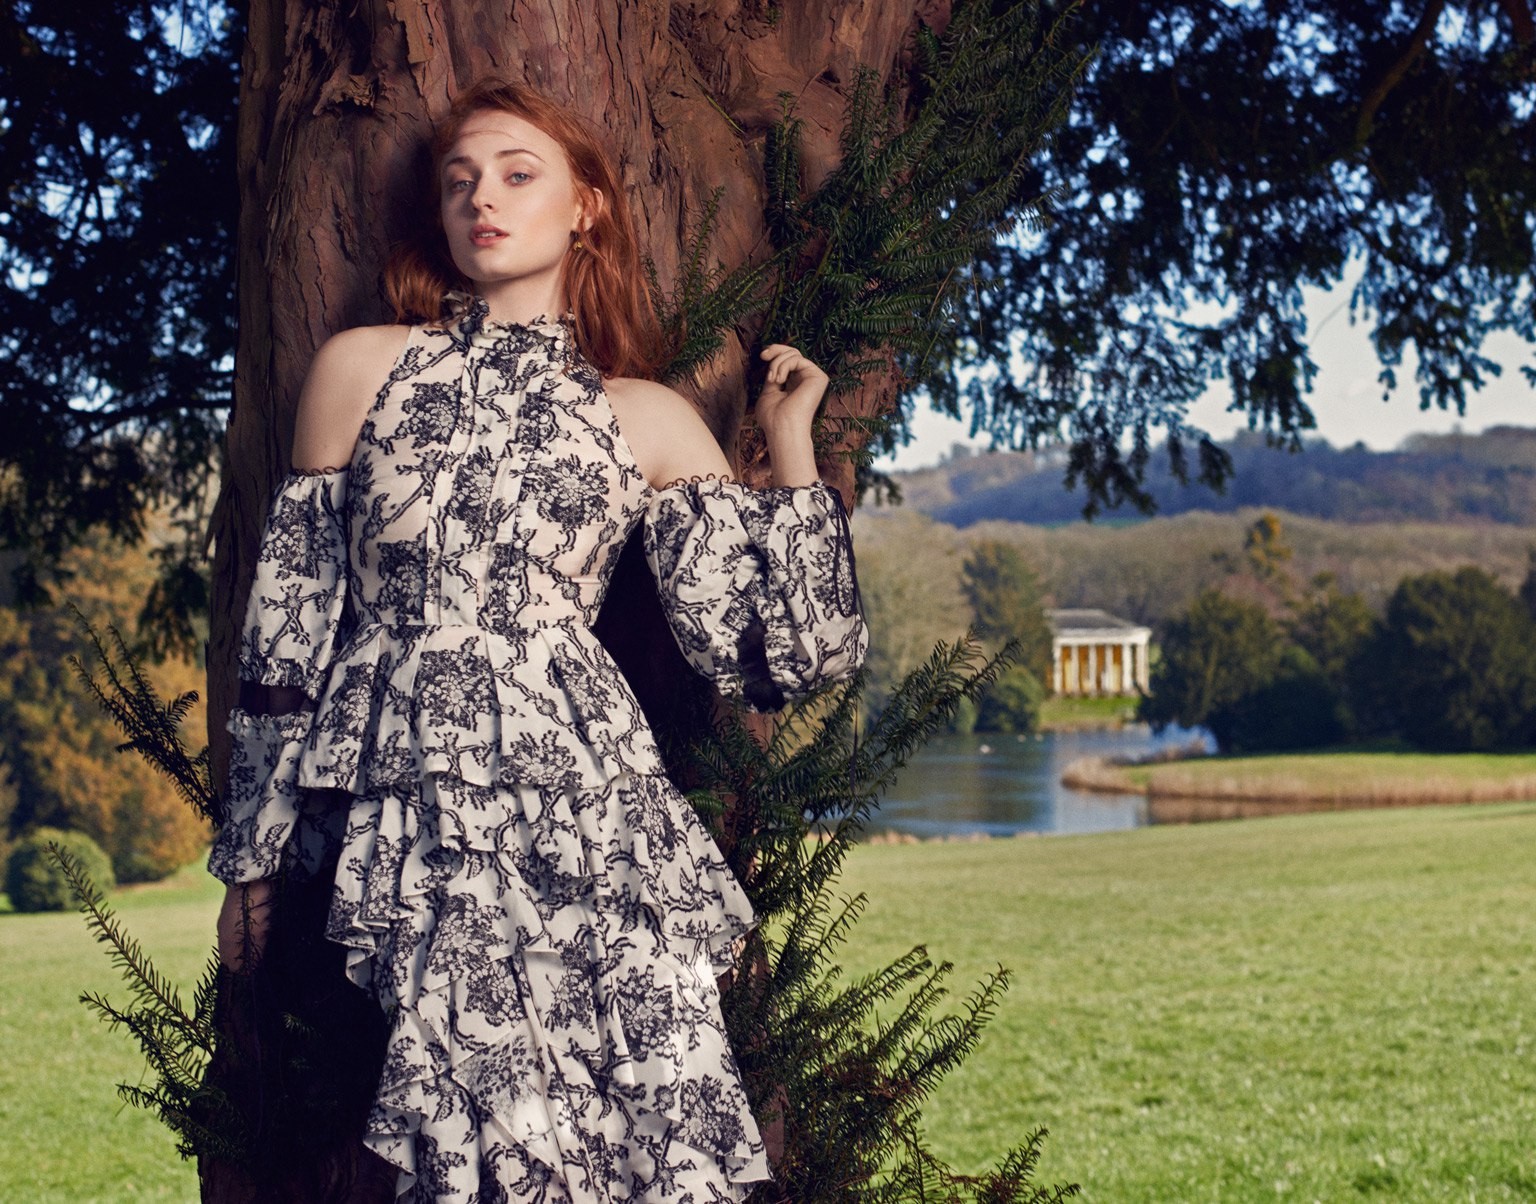 People 1536x1204 actress women redhead Sophie Turner looking at viewer trees park women outdoors British women outdoors dress standing